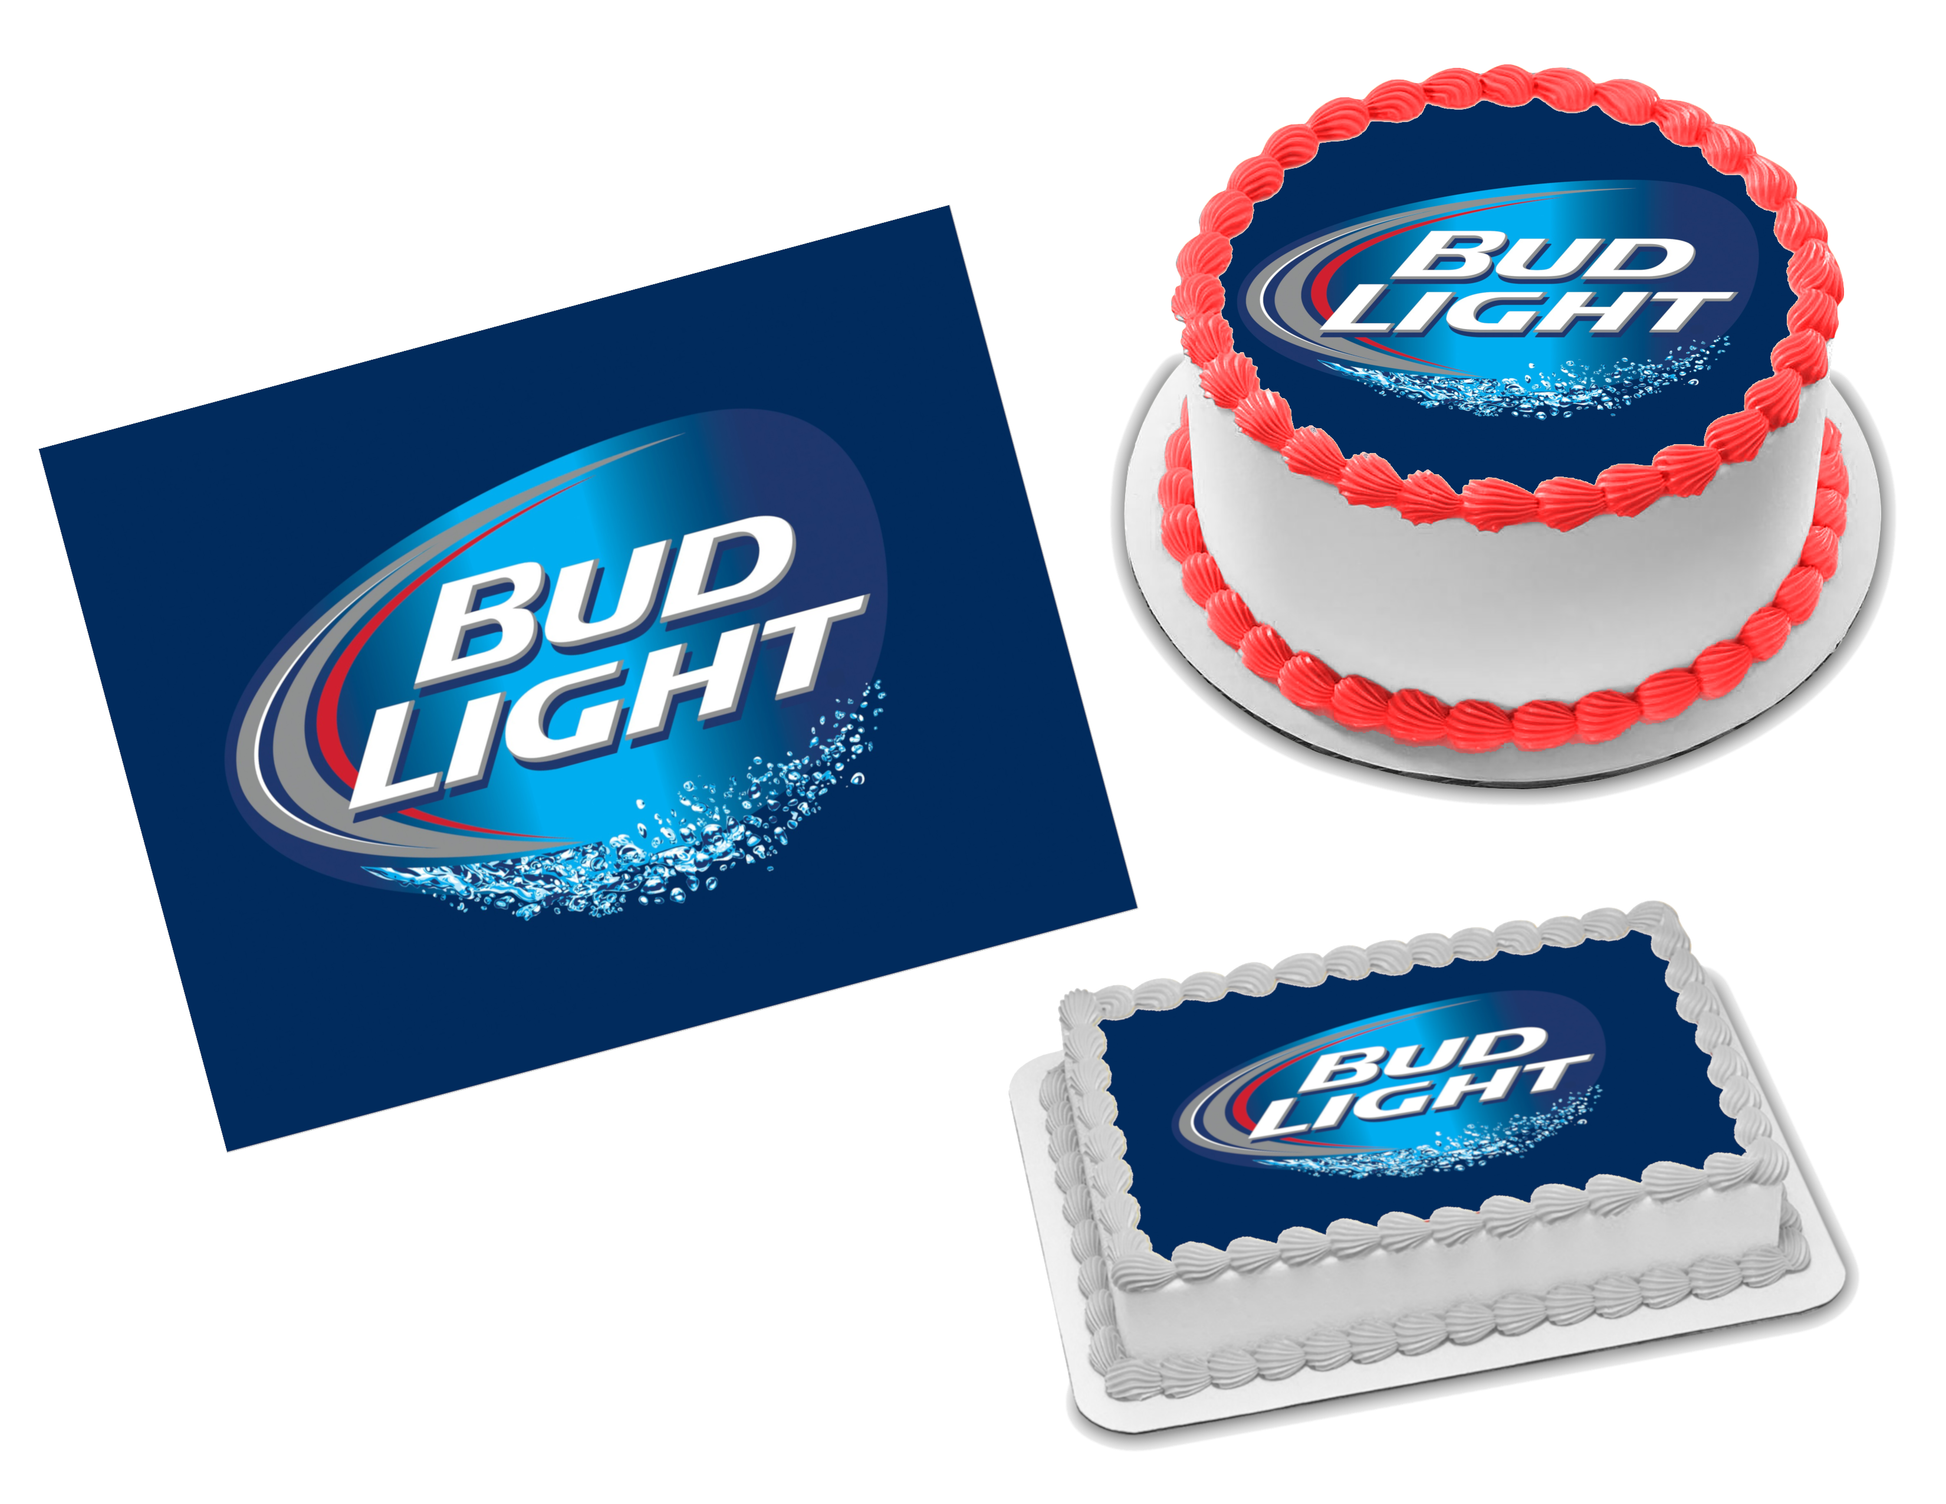 Michelob Ultra Edible Image Frosting Sheet #8 (70+ sizes) – Sweet Custom  Creations